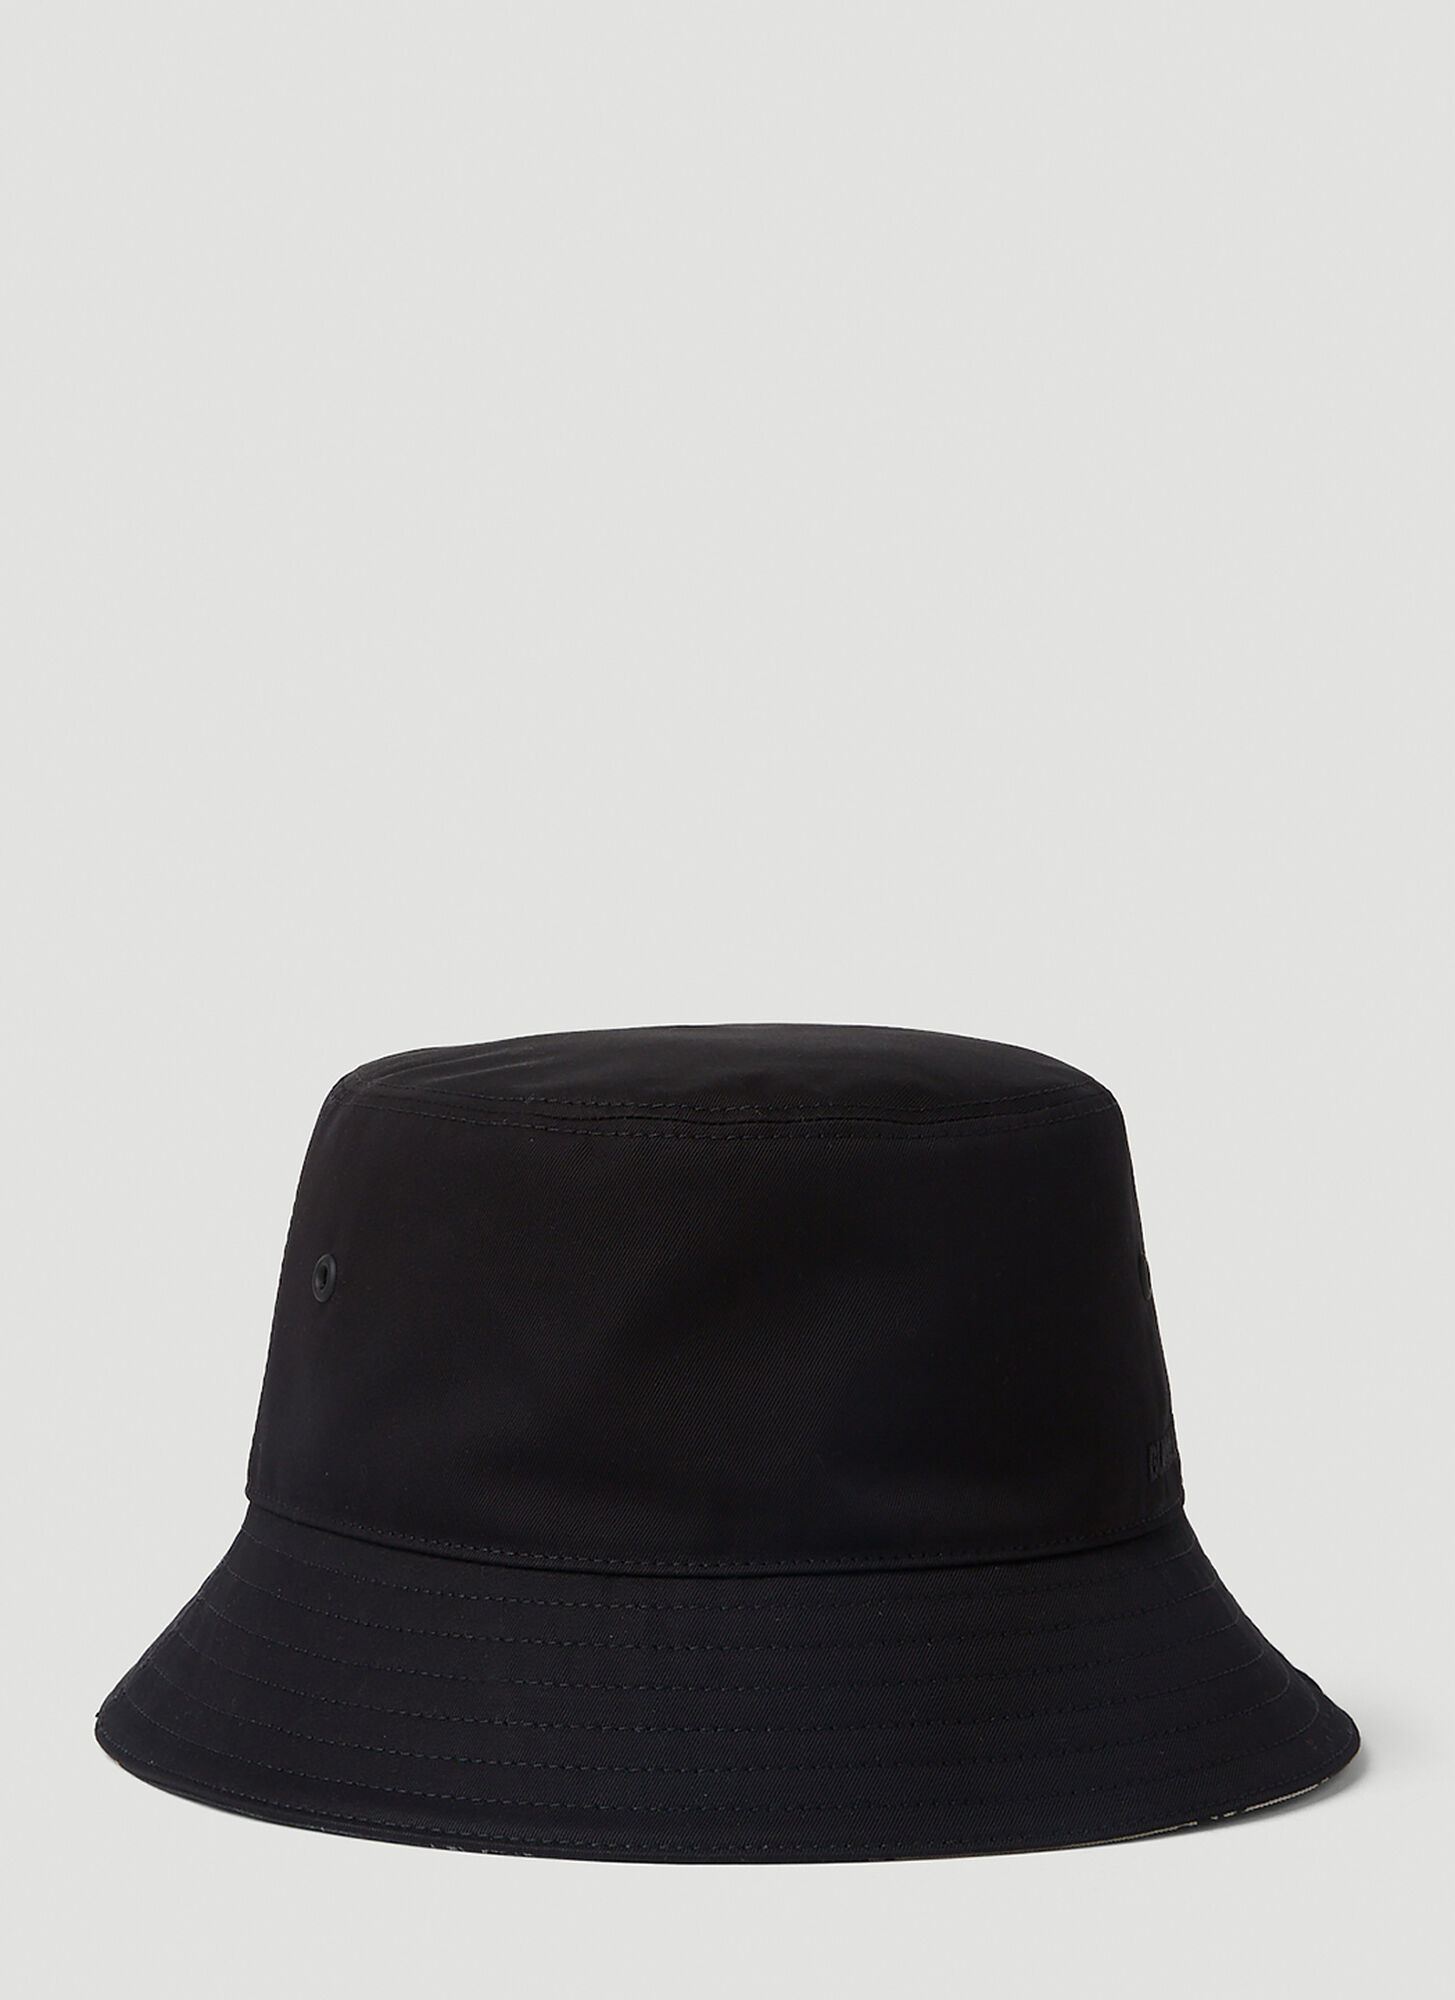 BURBERRY LOGO EMBROIDERY BUCKET HAT